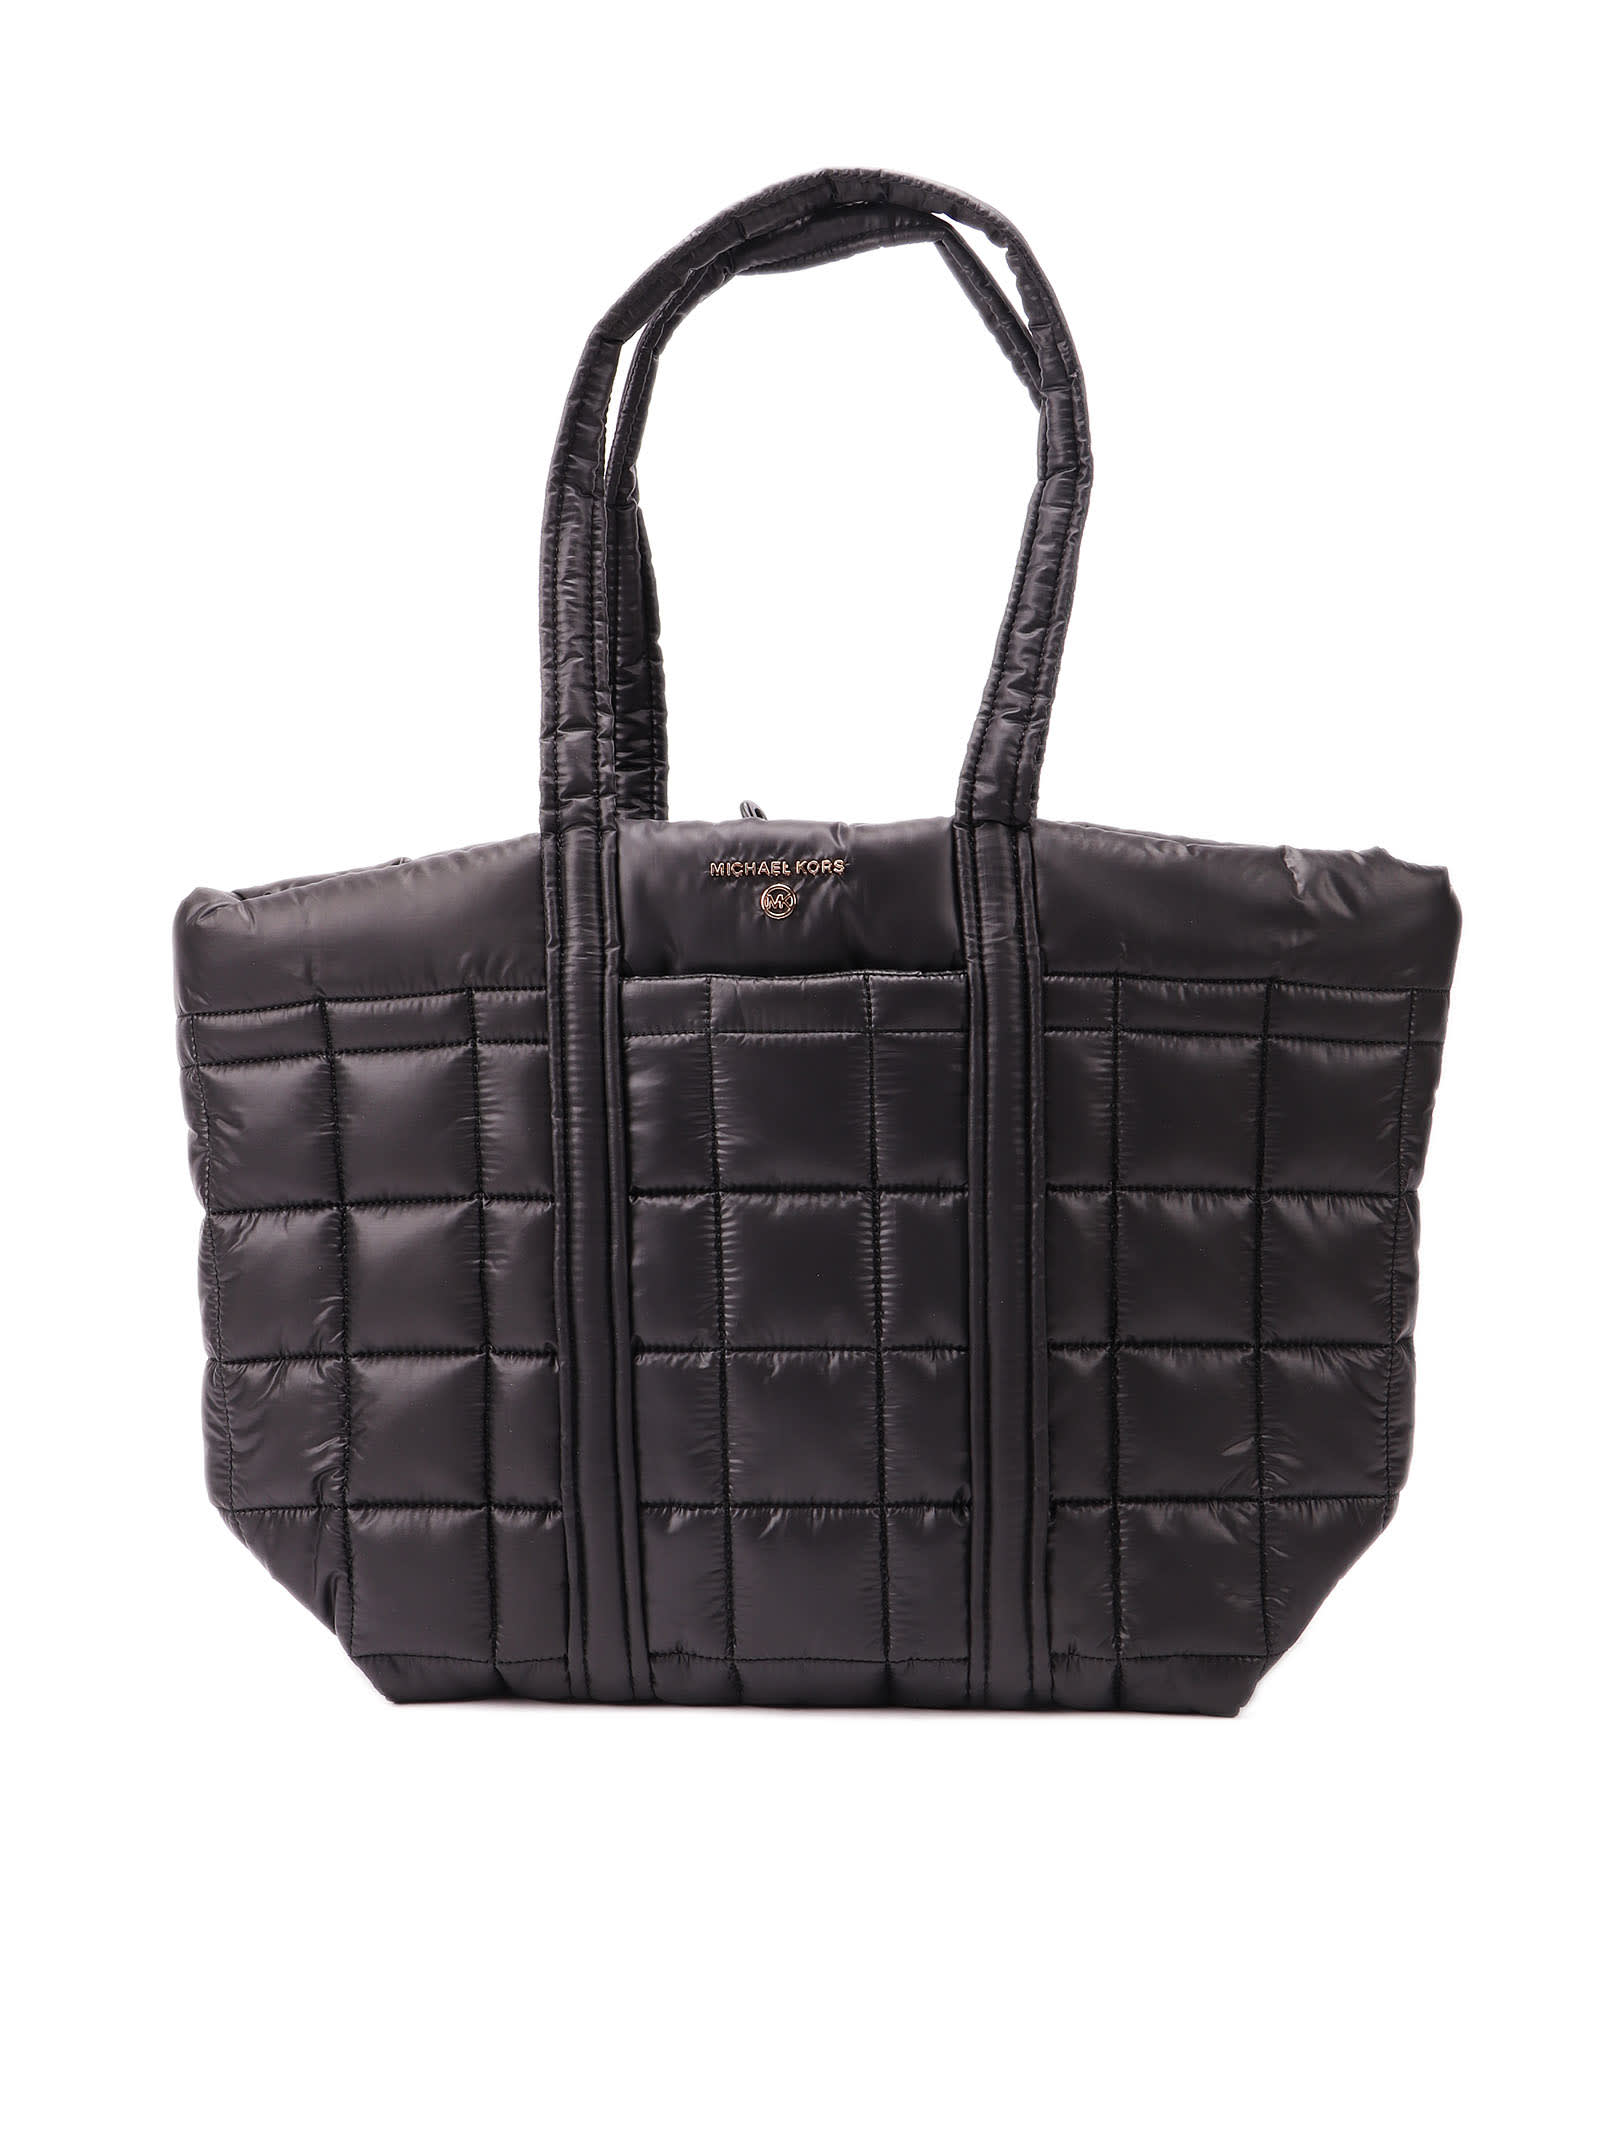 Michael Kors Collection Lg Tote Stirling